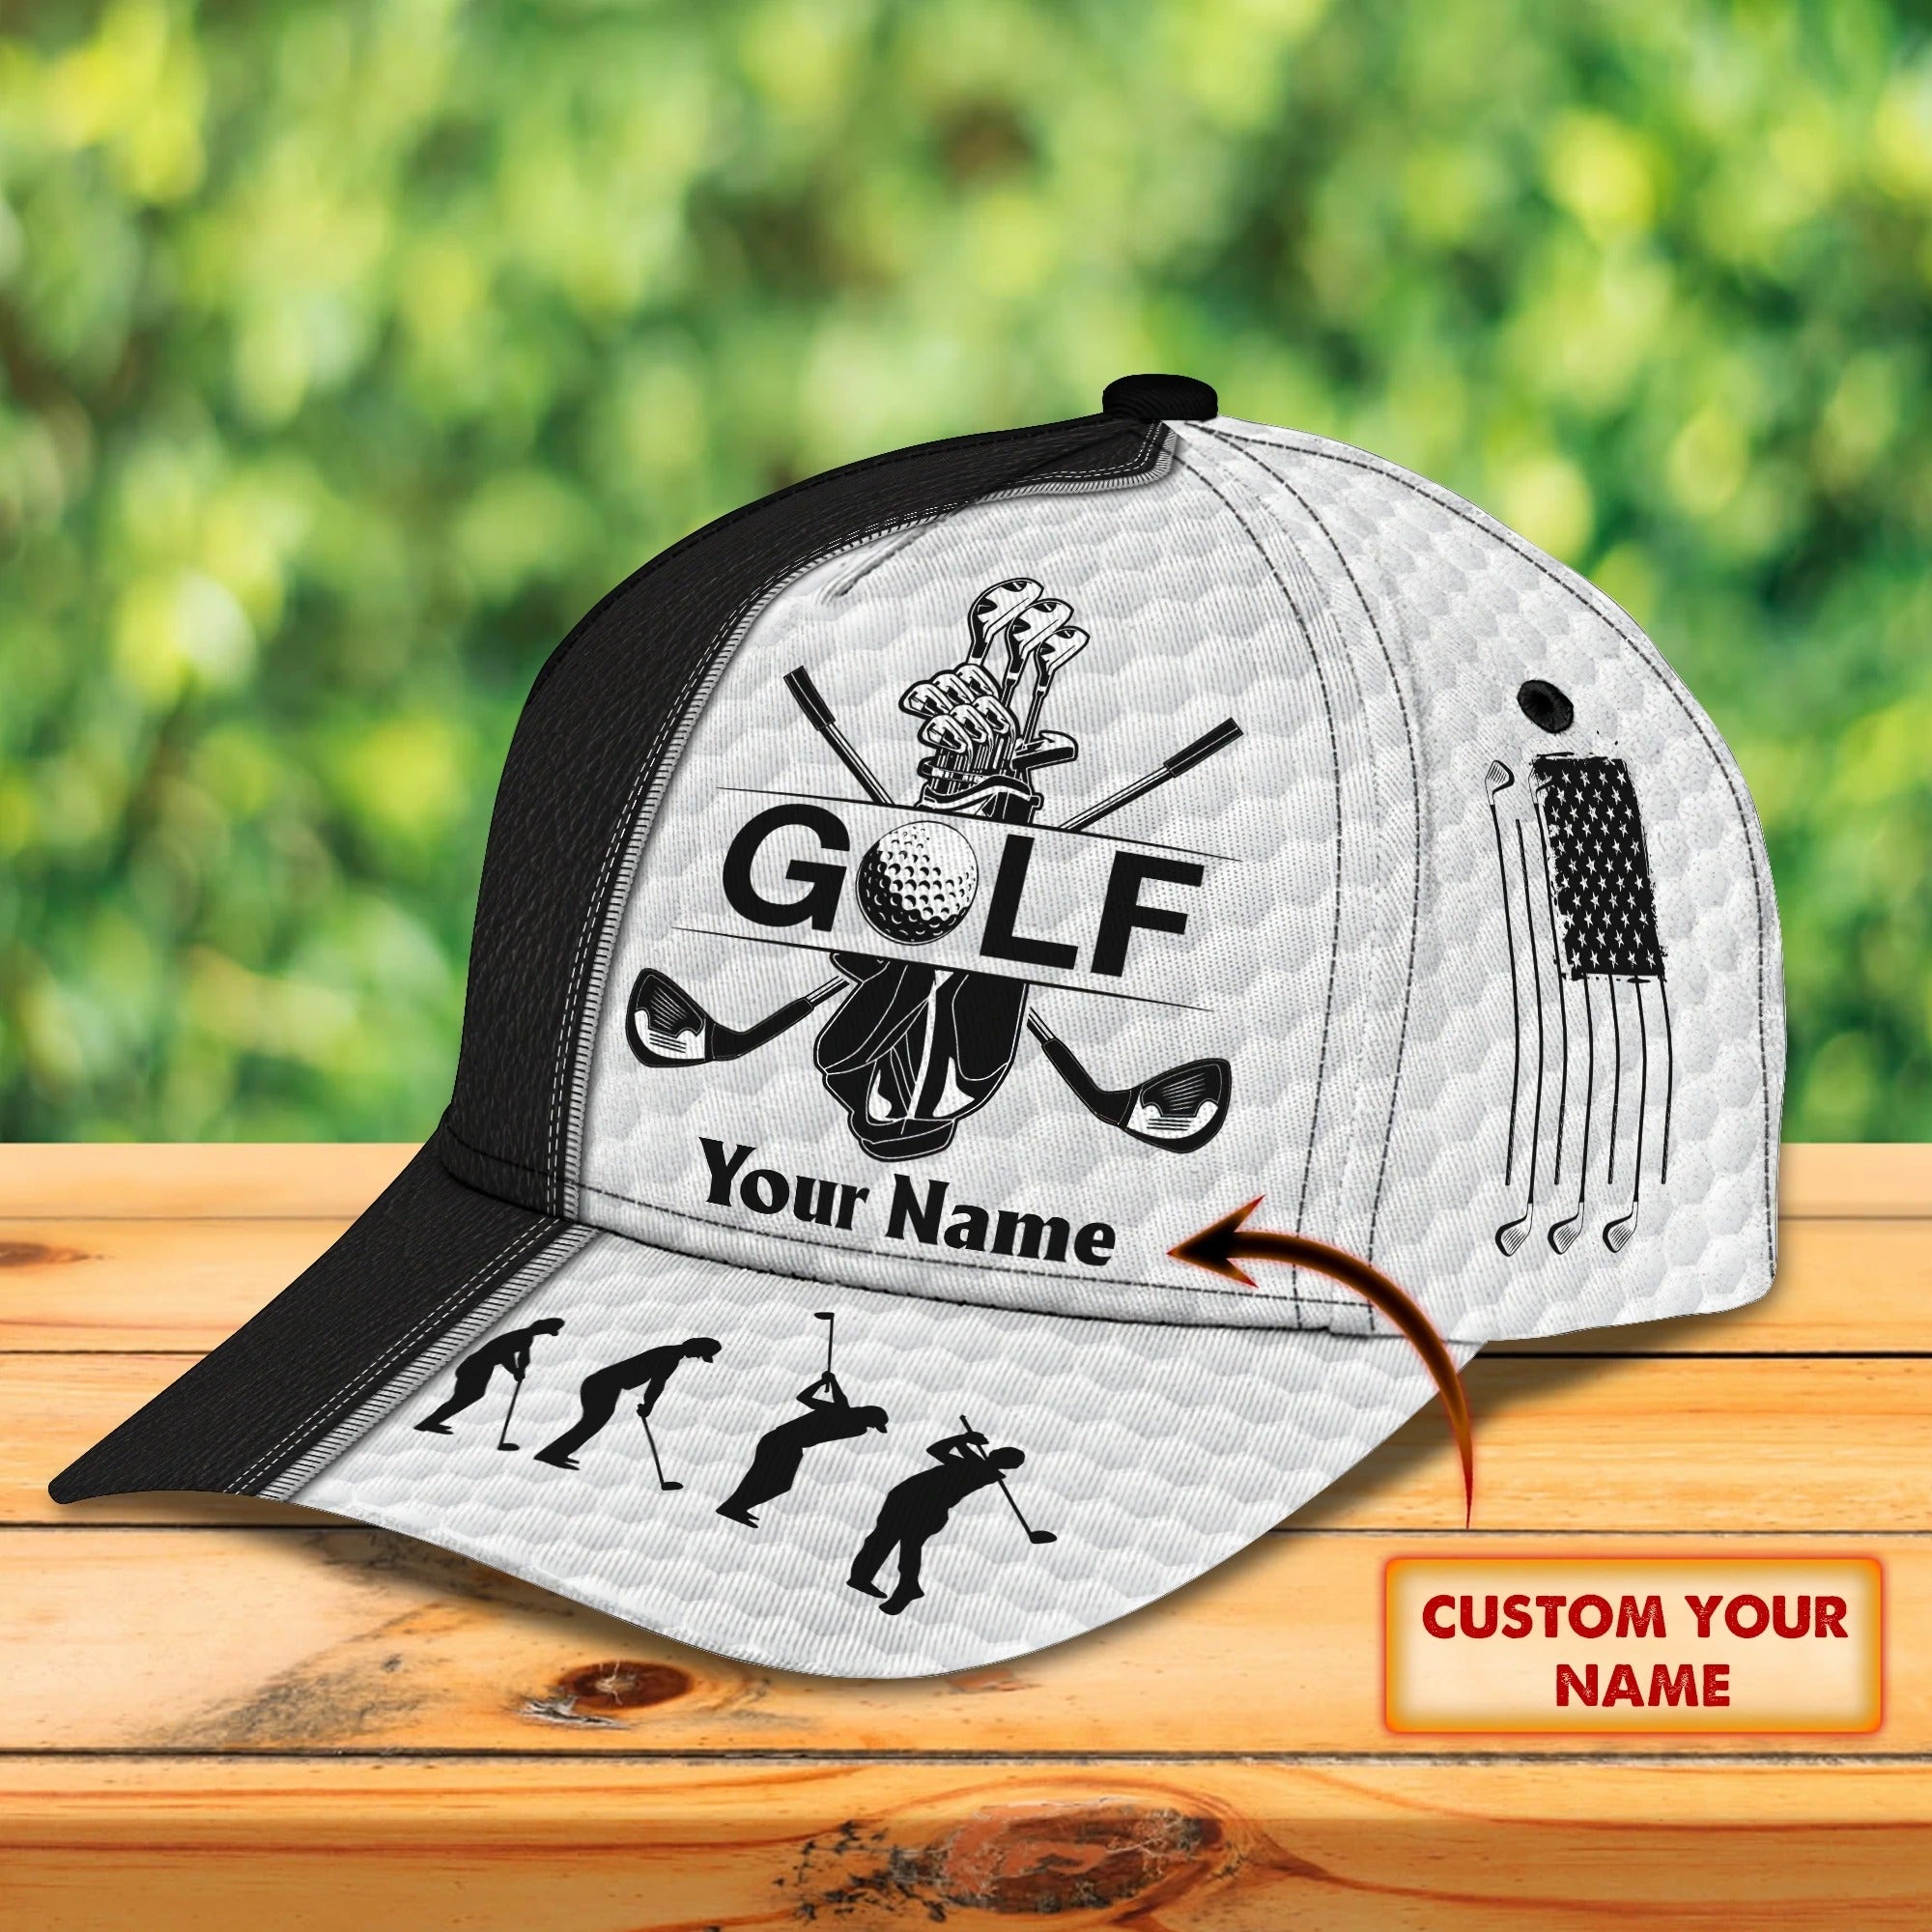 Personalized Classic Cap For Golf Lovers/ Baseball Man Cap/ Birthday Golfer Man Gifts/ Present To Golfer